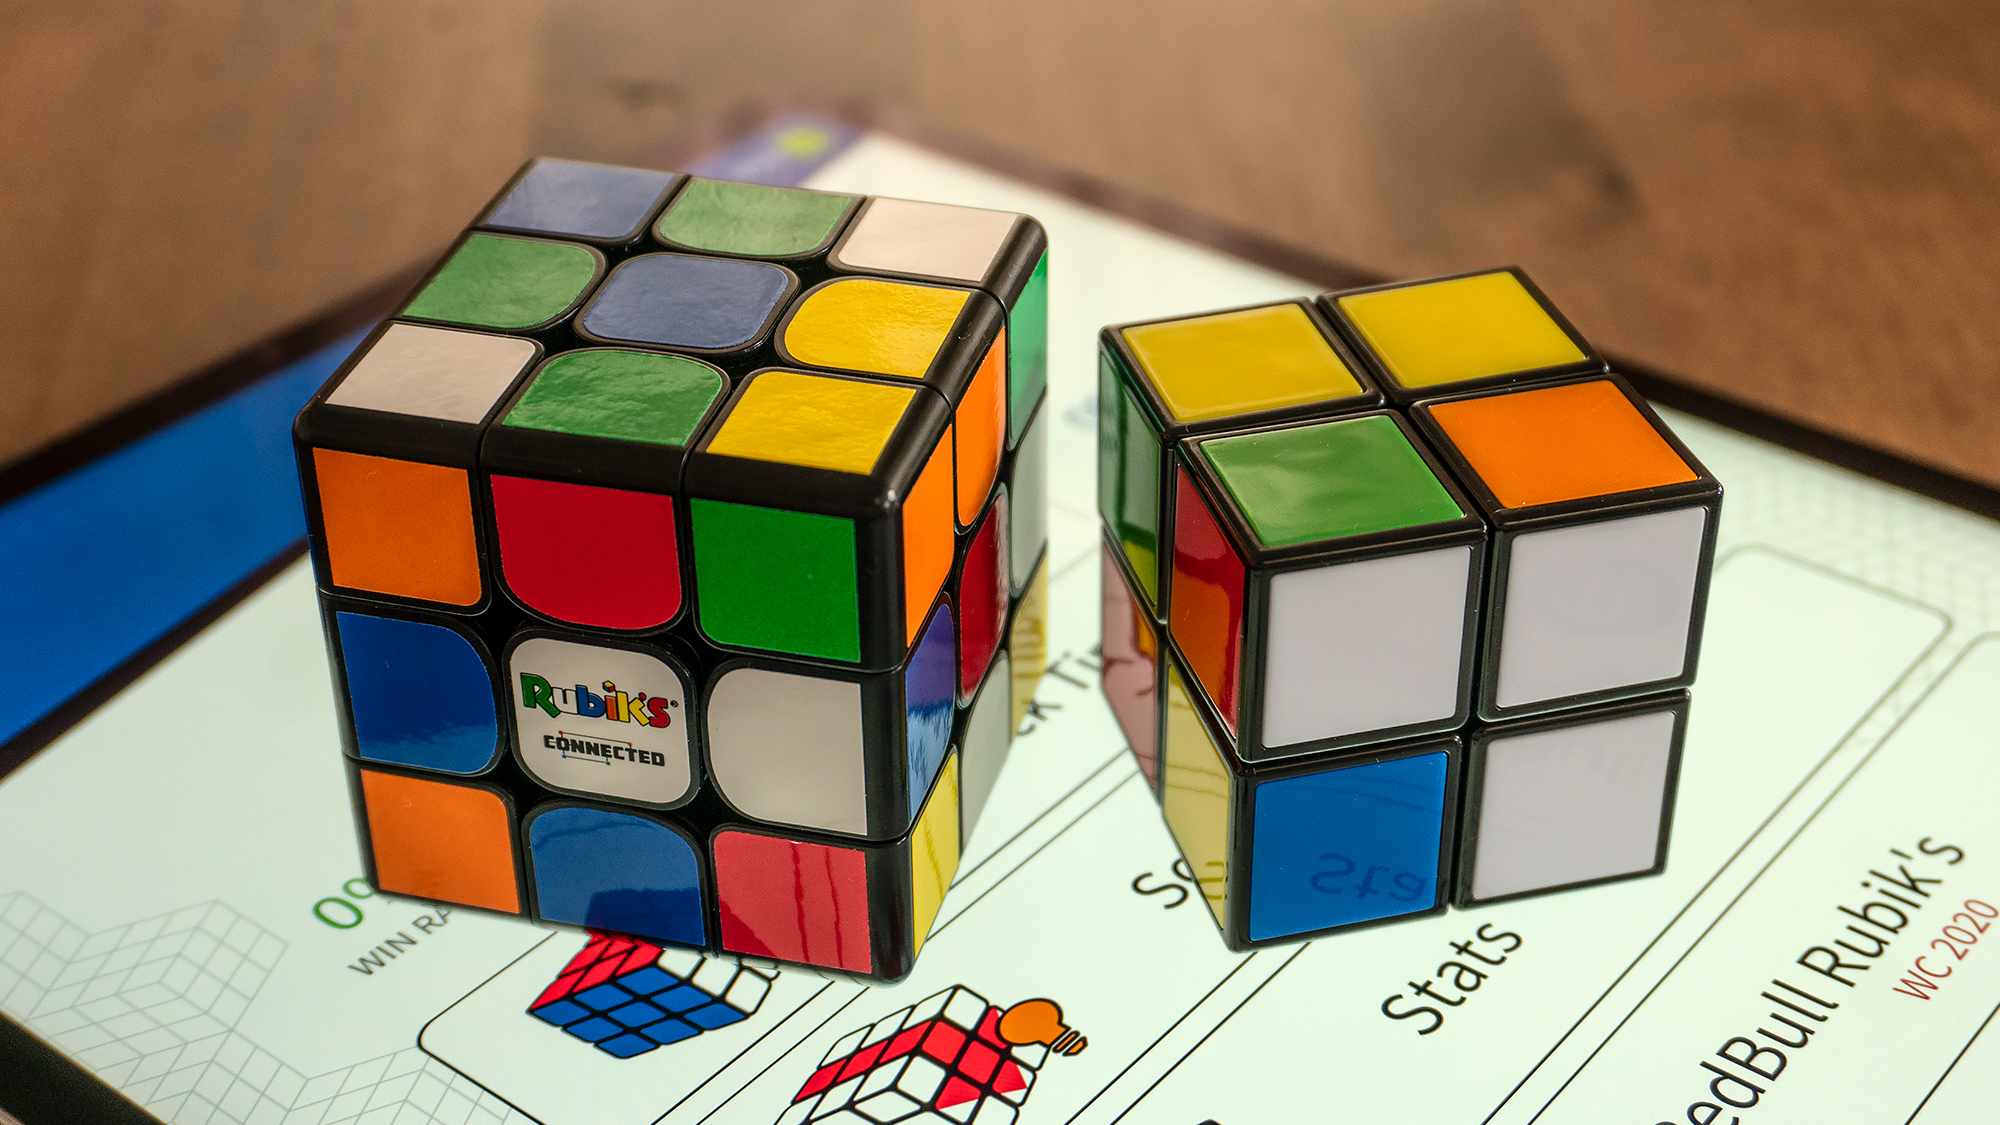 The Rubik's Connected Cube looks and feels like the original (here it's sitting next to a simpler 2x2 version of the puzzle) but features curved corners to facilitate Speedcubing. (Photo: Andrew Liszewski - Gizmodo)